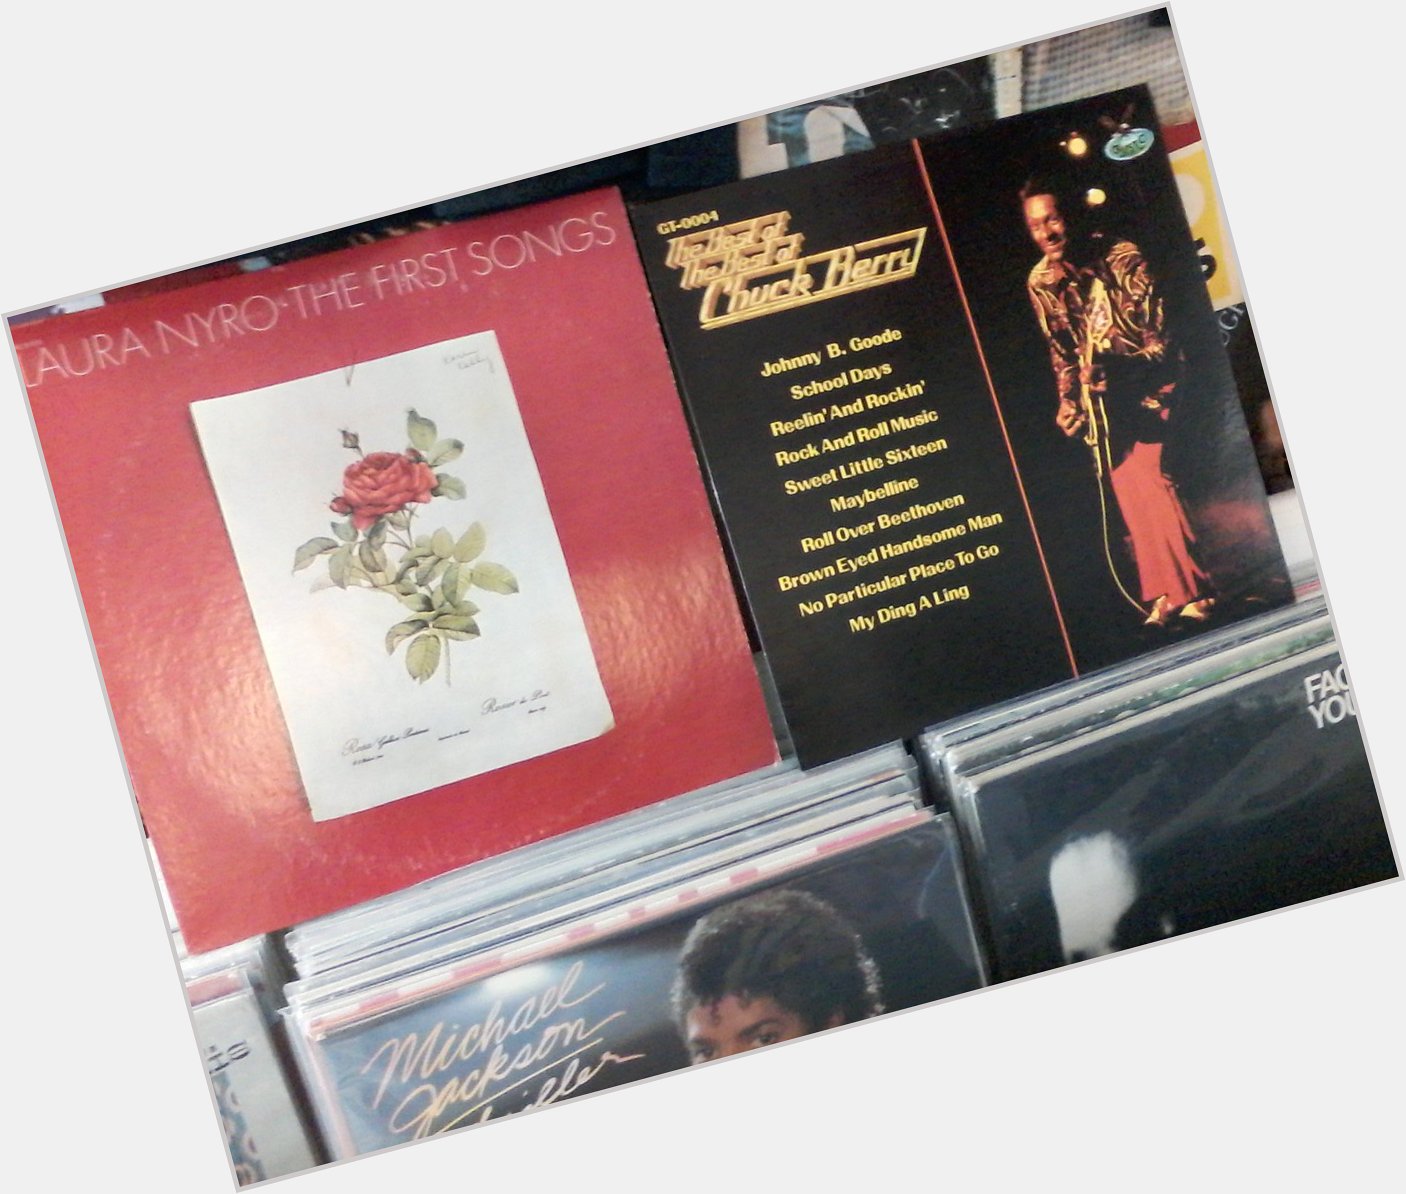 Happy Birthday to the late Laura Nyro & the late Chuck Berry 